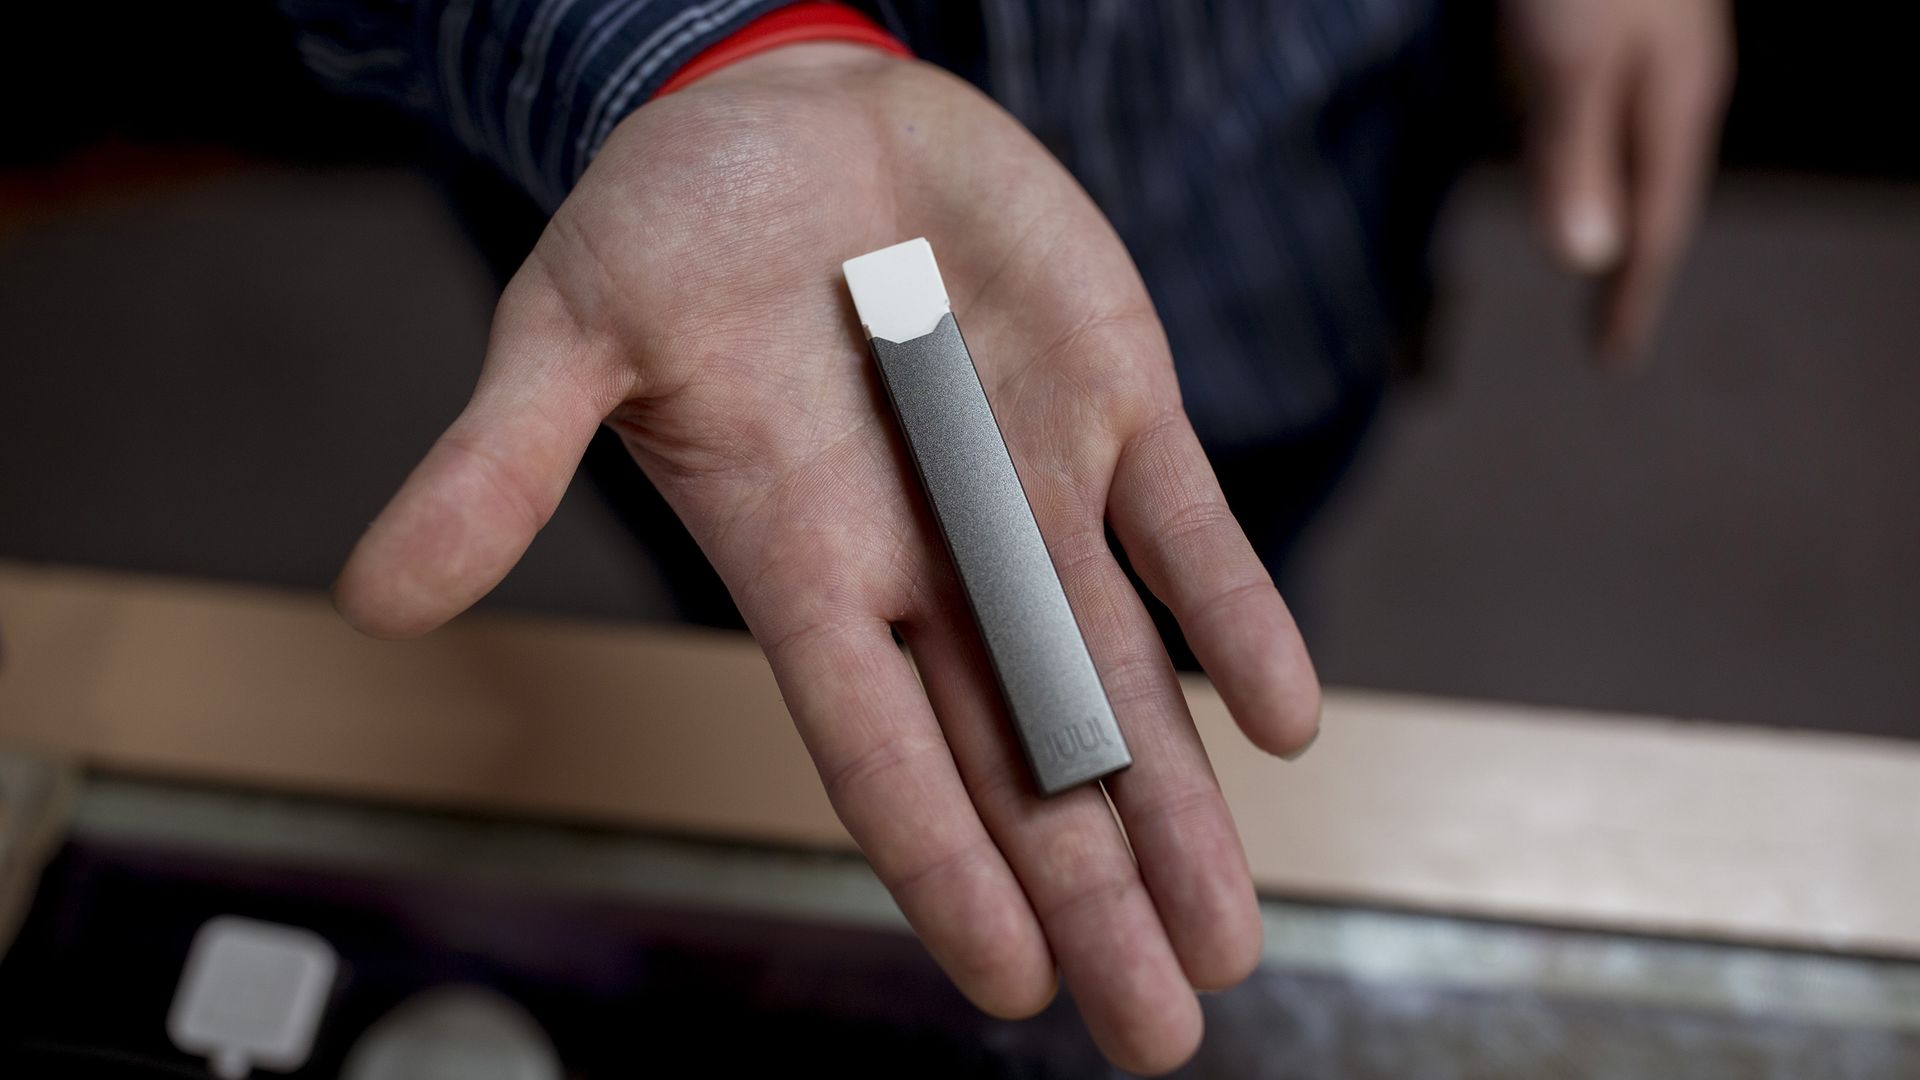 In this image, someone holds a small, rectangular Juul vape in the palm of their outstretched hand, facing the camera.